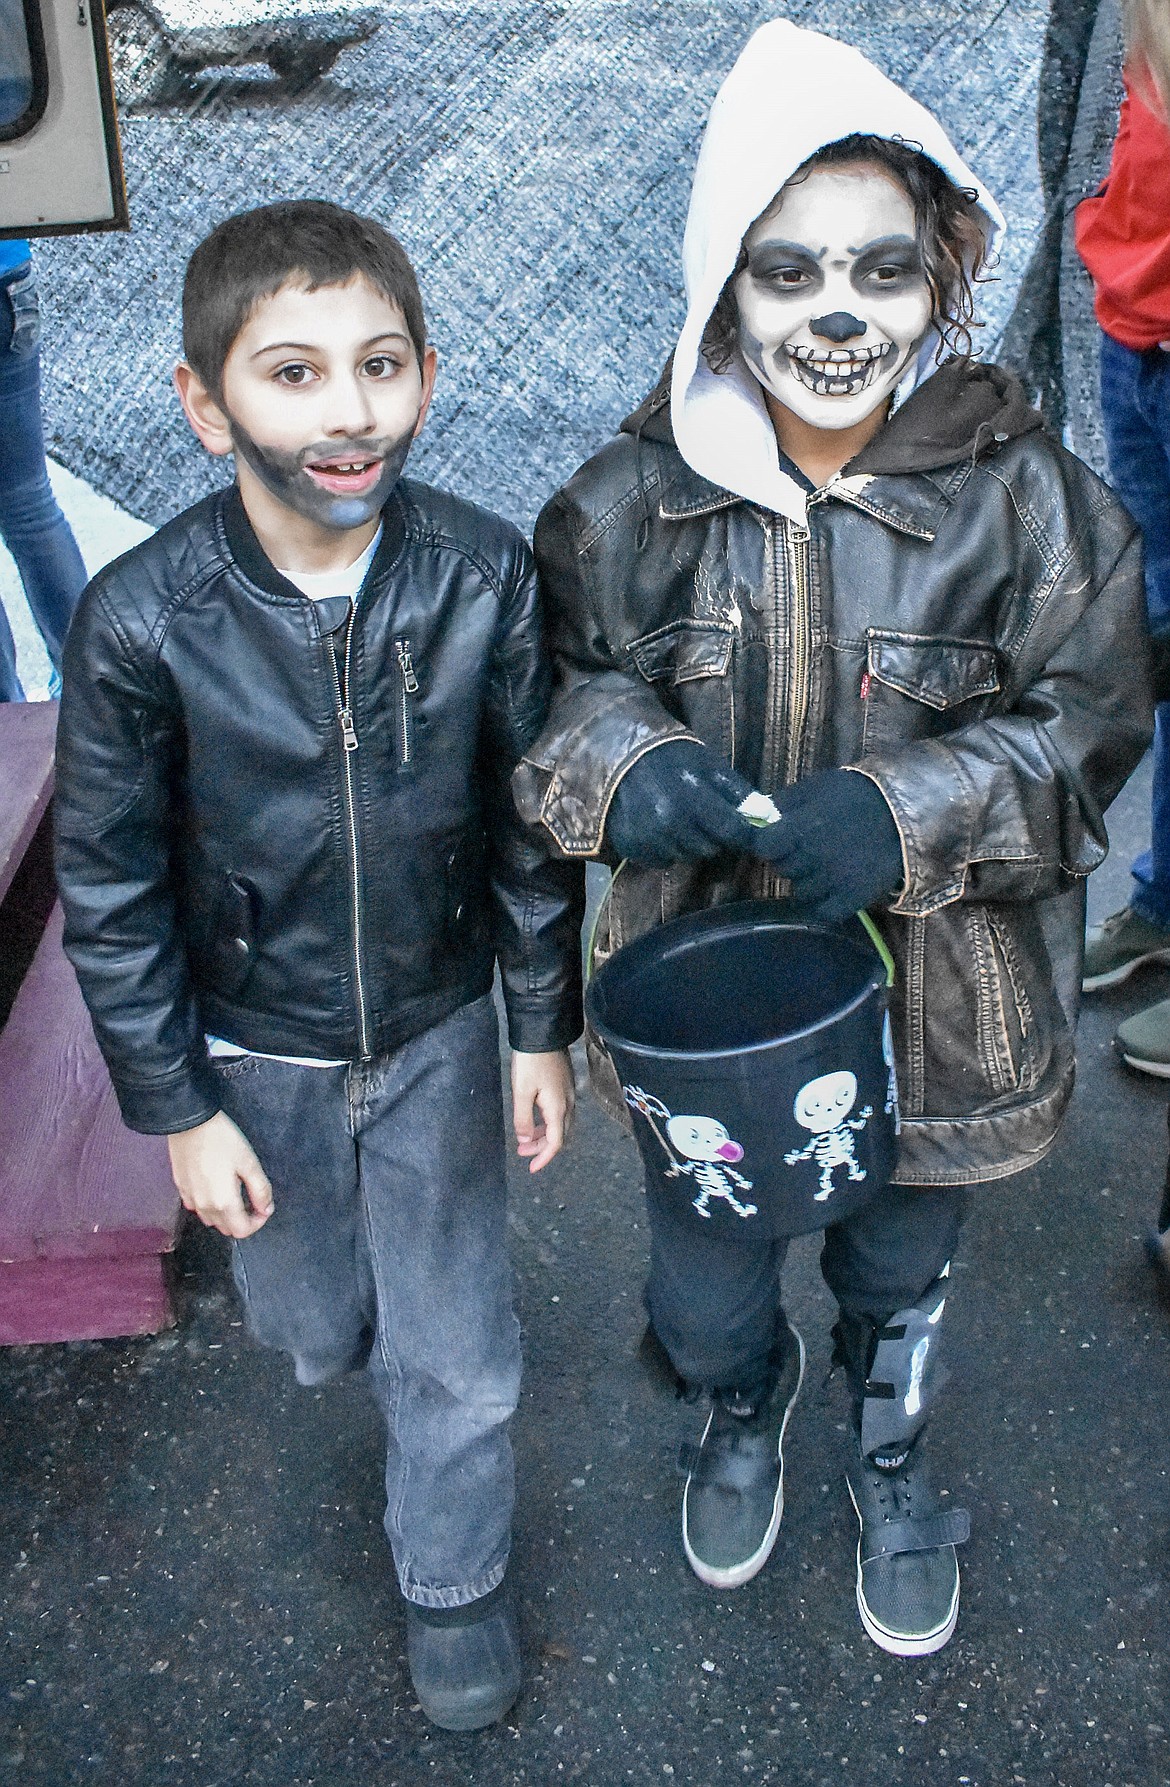 Henry Roy as Negan from The Walking Dead, and Preston Stafford as a Fortnite &#147;Skull Trooper&#148; exit the haunted school bus all smiles at Trunk-or-Treat at the Troy Activity Center Wednesday. (Ben Kibbey/The Western News)